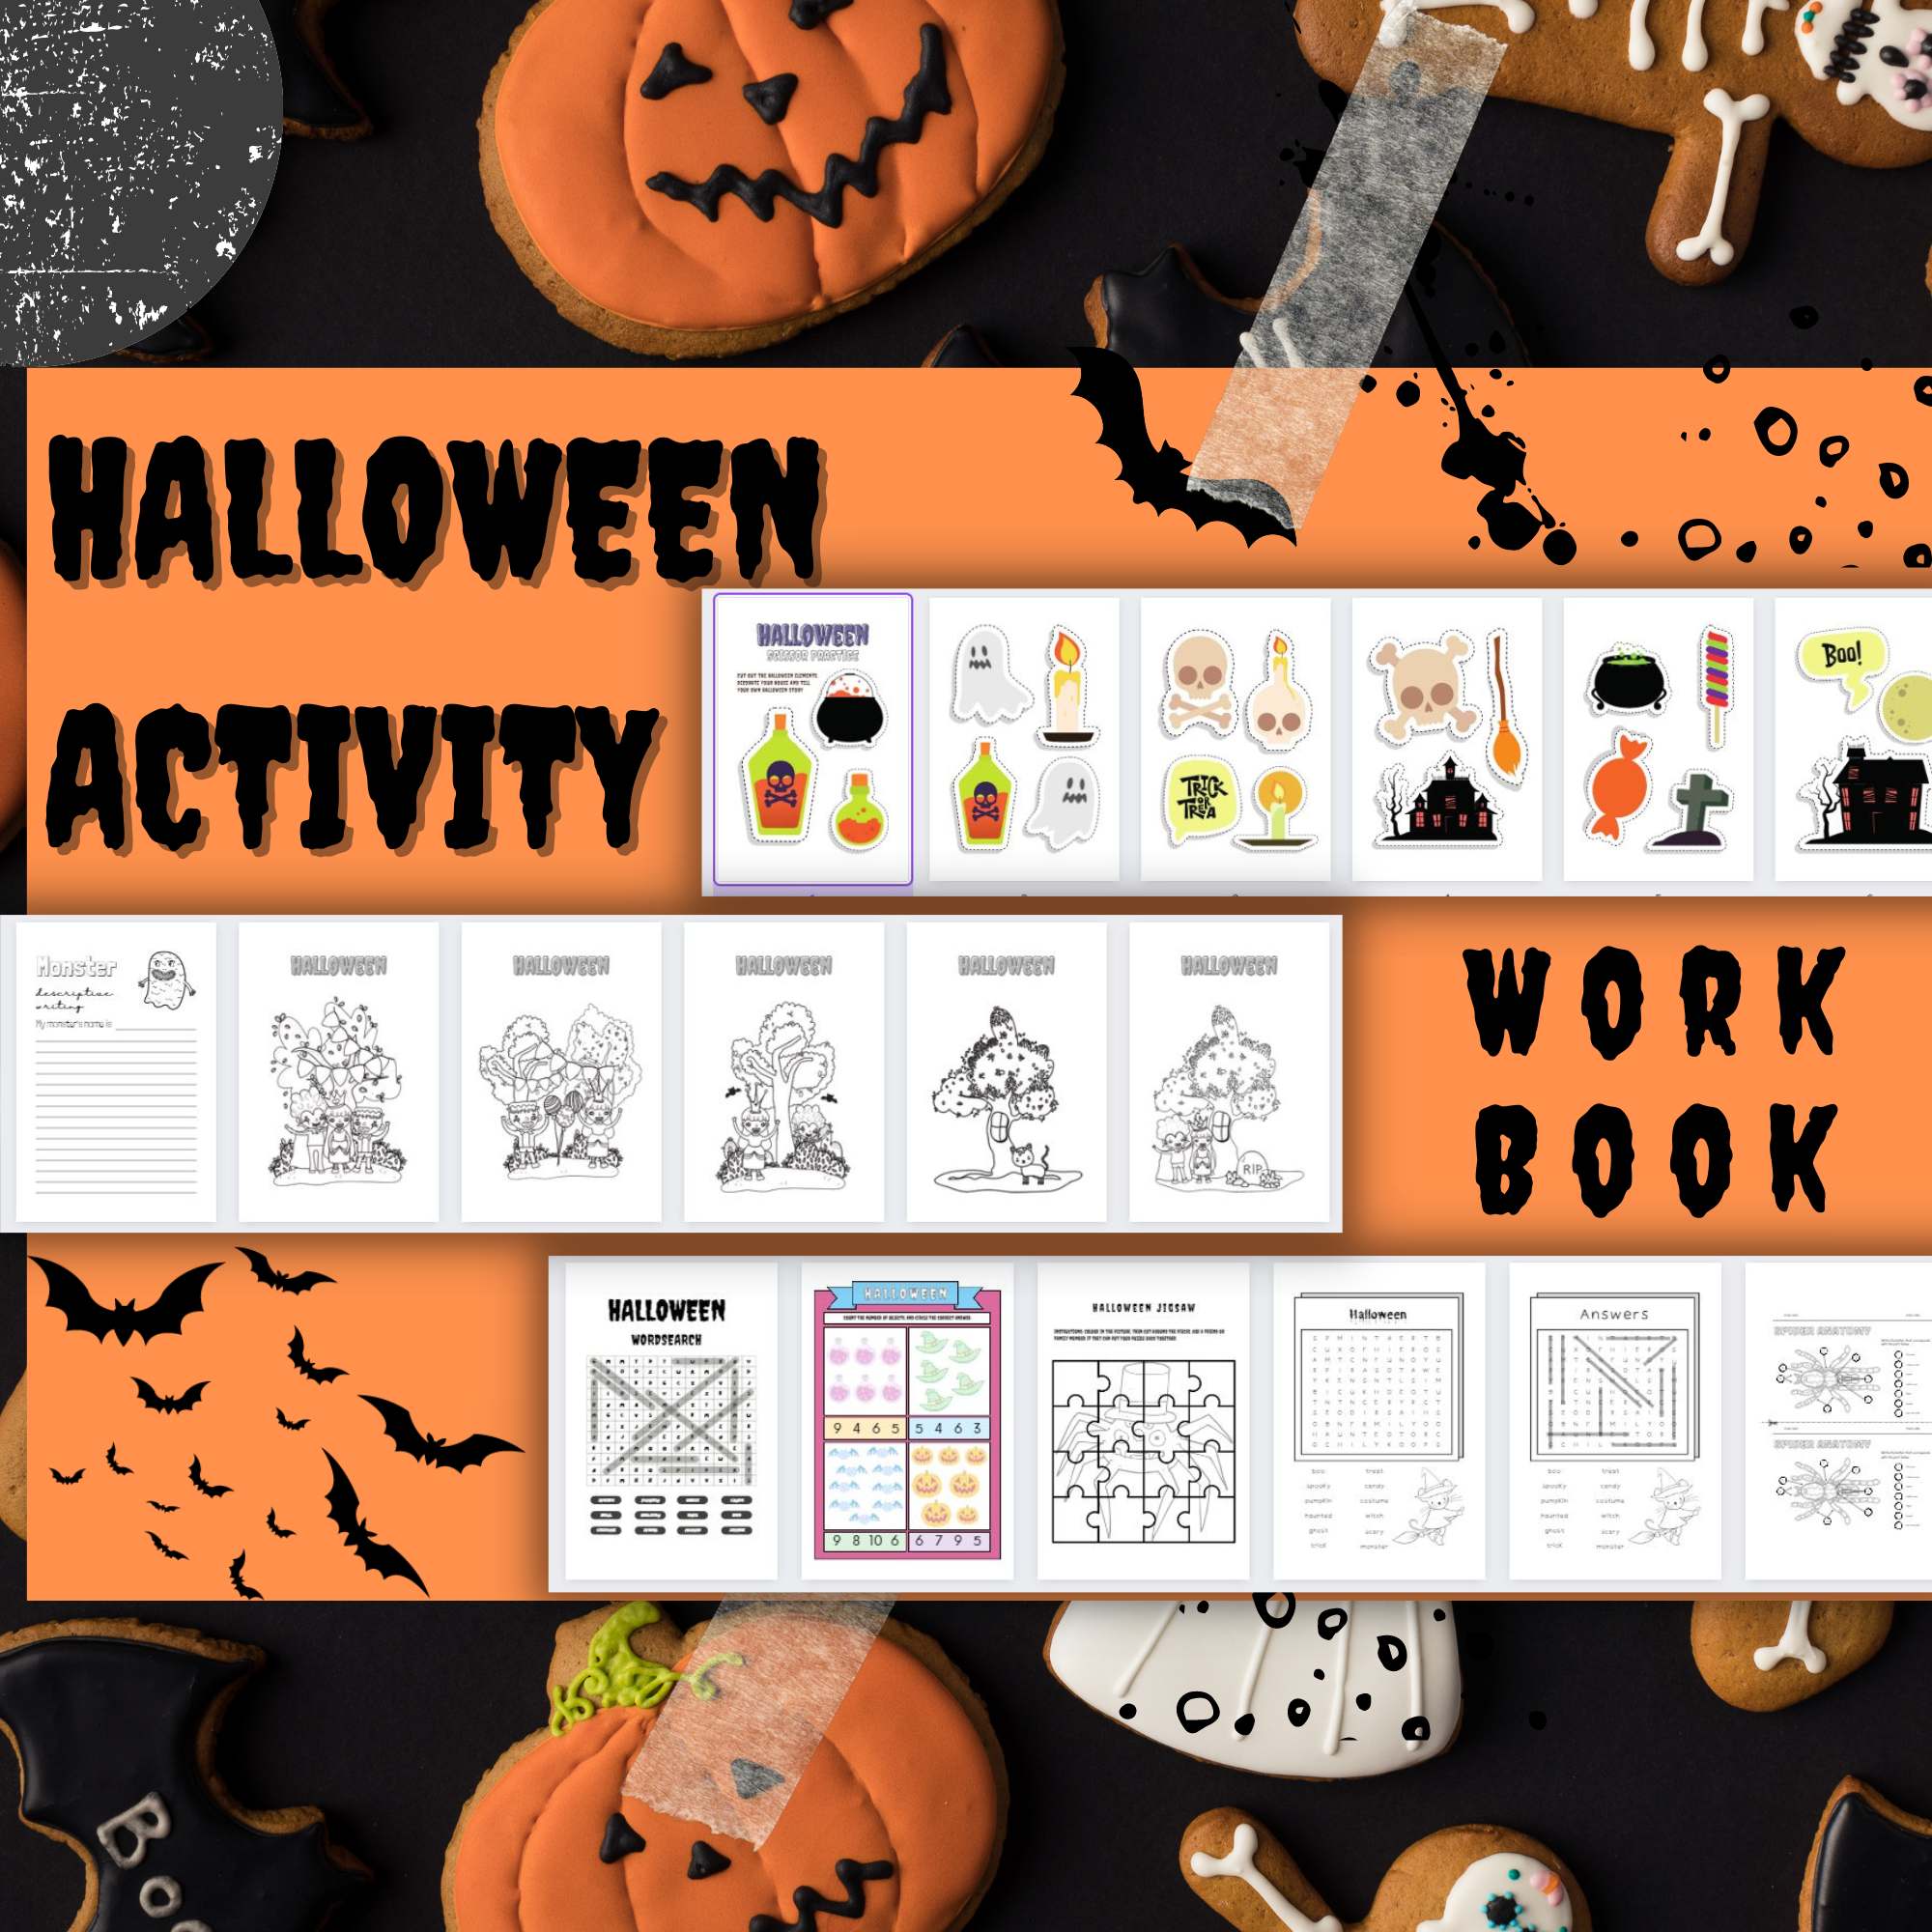 Halloween Coloring Pages | Halloween Activities | Halloween Fun And Games preview image.